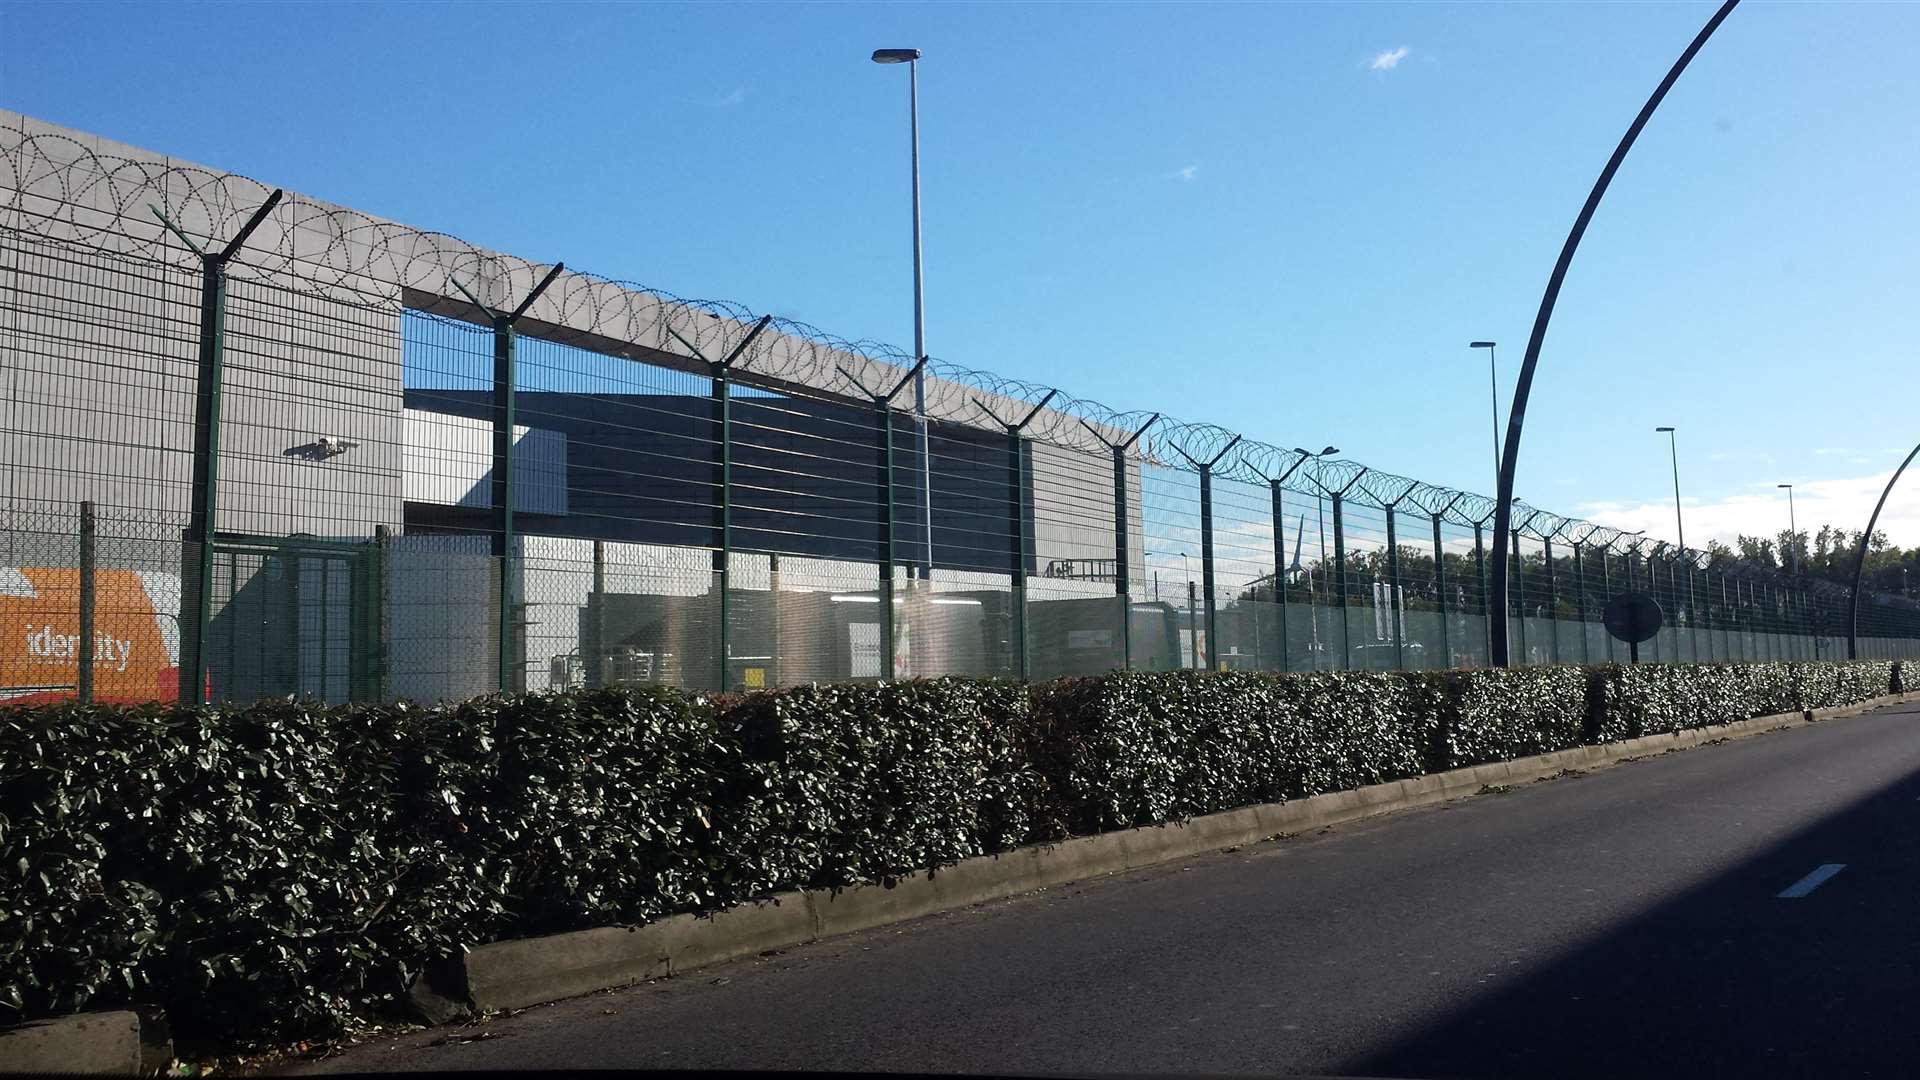 Huge fences have been put up around Calais as a result of the migrant crisis